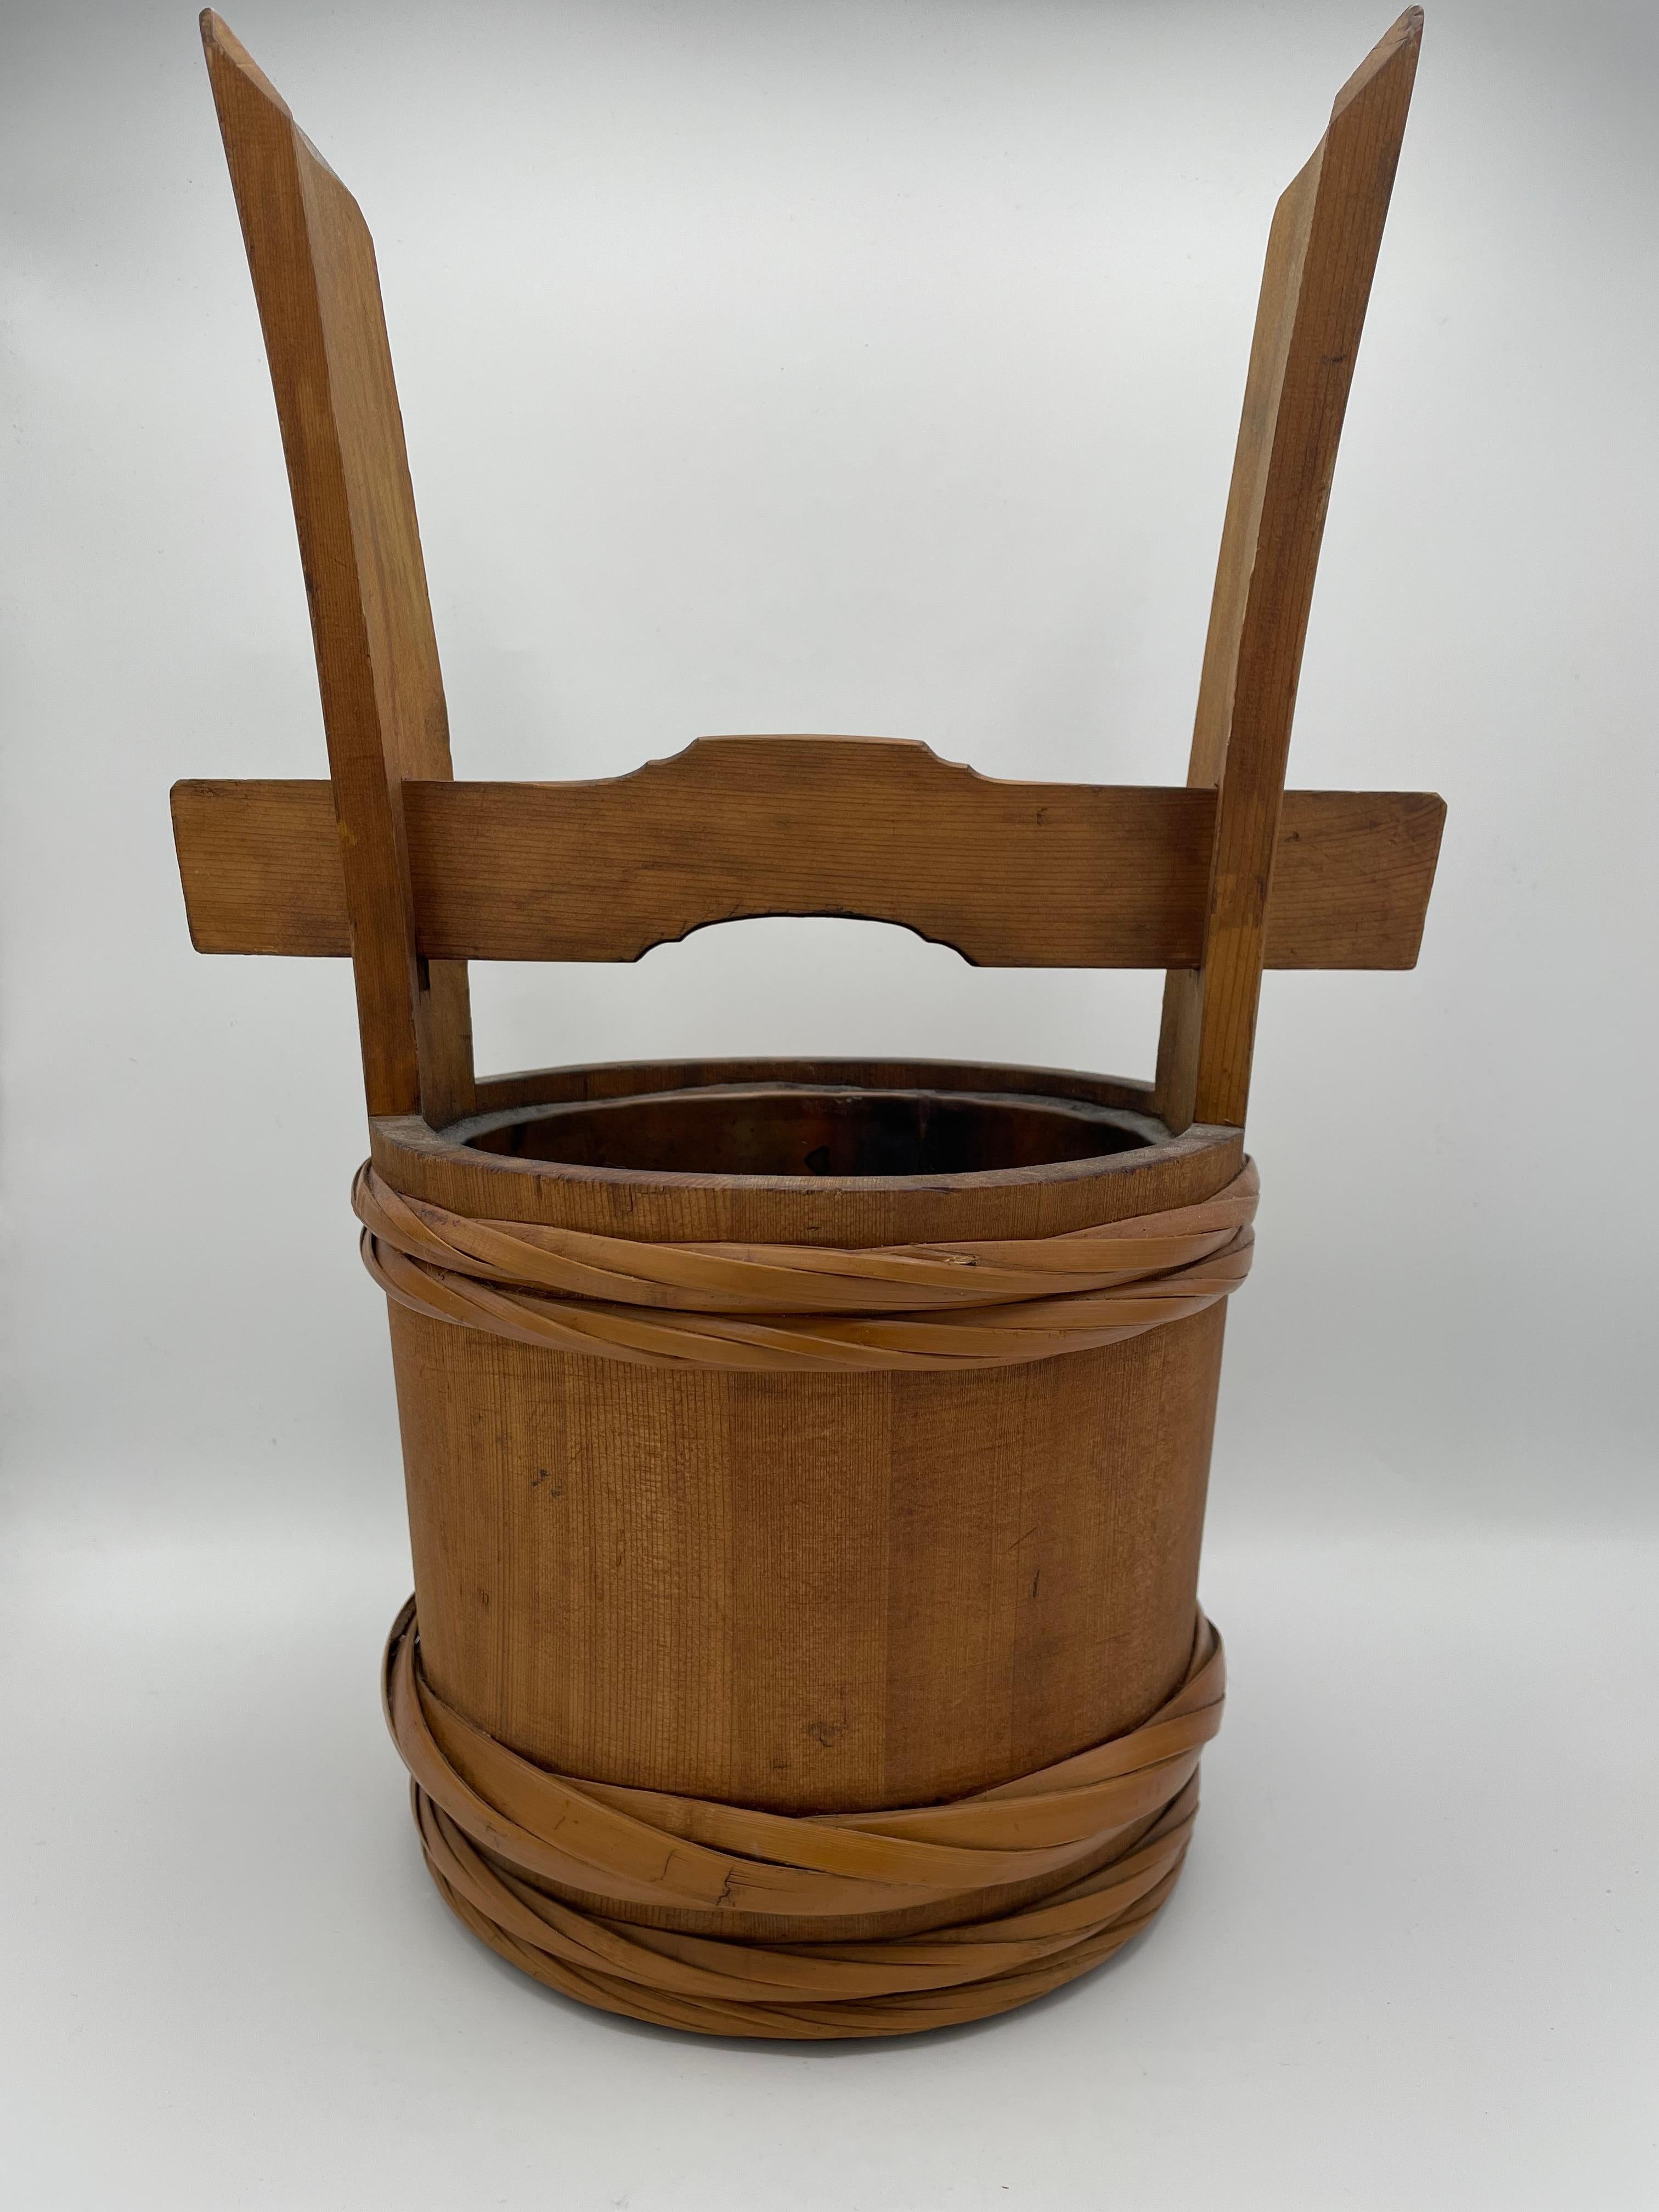 A teoke/mizukumioke is a bucket used for fetching water. It is a bucket with a handle that holds water or hot water and is lowered into one hand to be carried.
And also before the spread of running water, water for drinking and cooking was stored